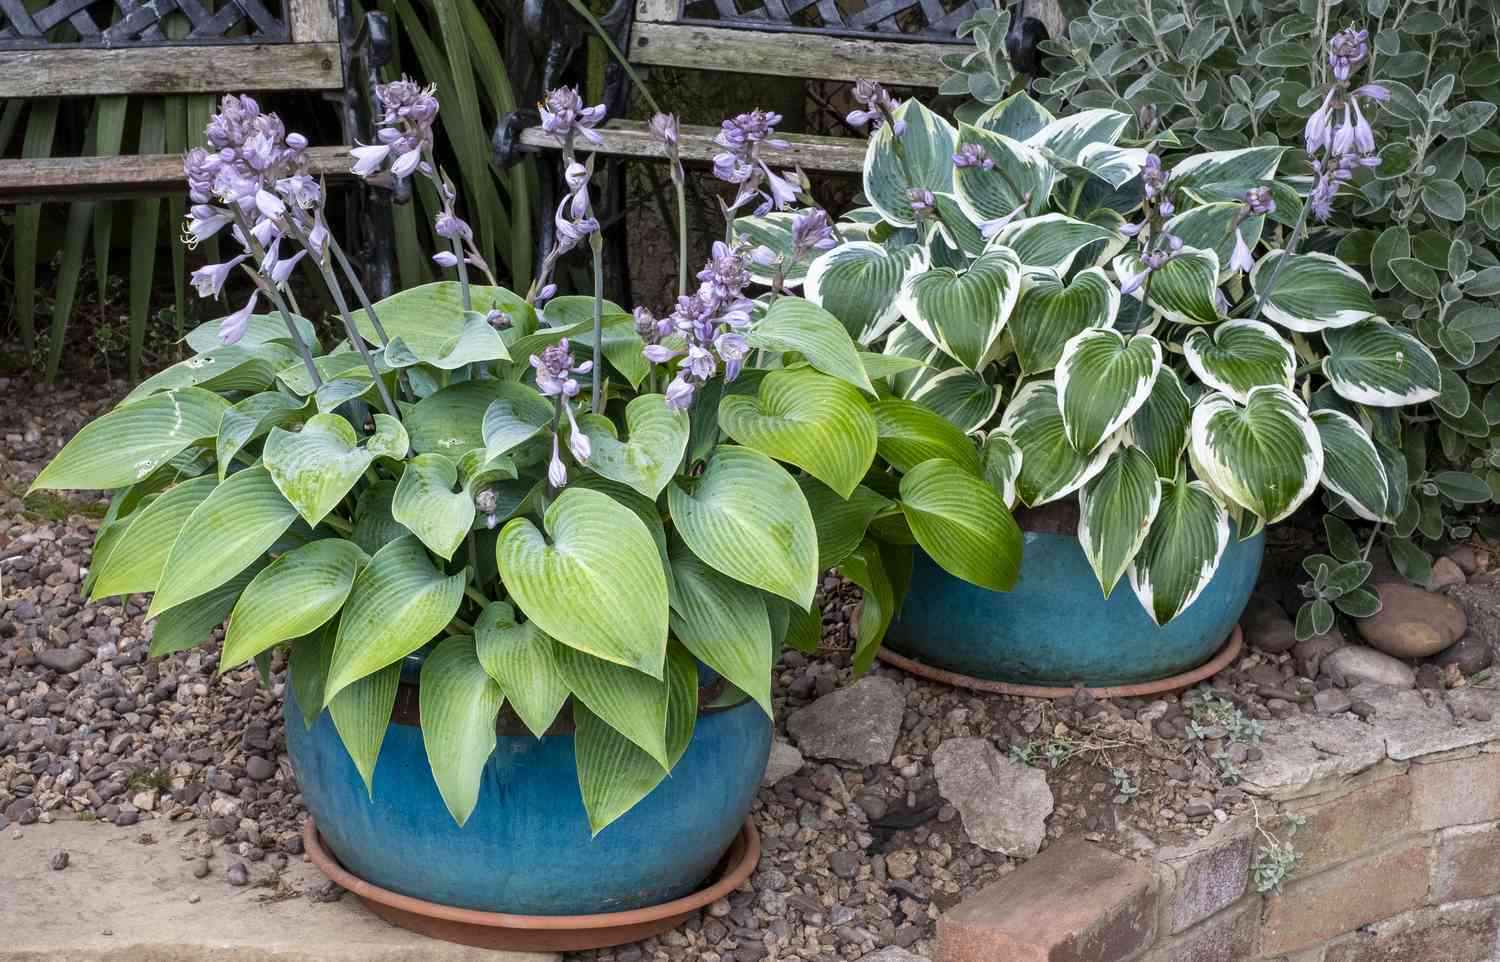 What Are The Best Low Maintenance Outdoor Potted Plants?